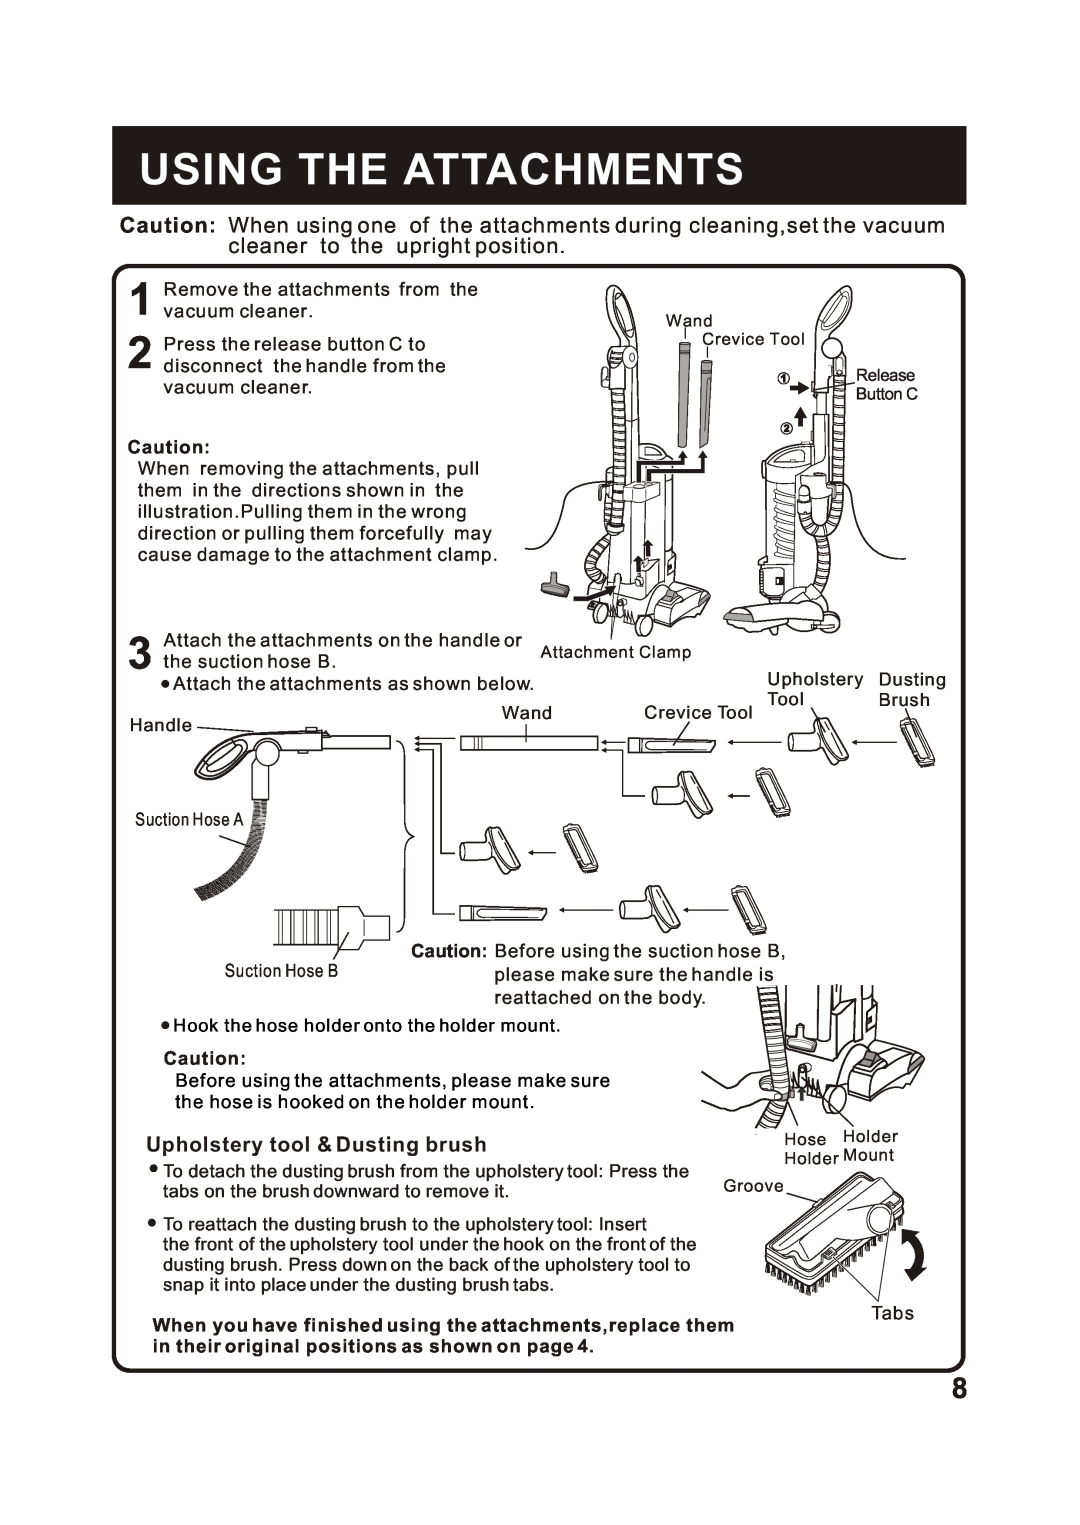 Fantom Vacuum FM741B instruction manual Using The Attachments, Upholstery tool & Dusting brush 